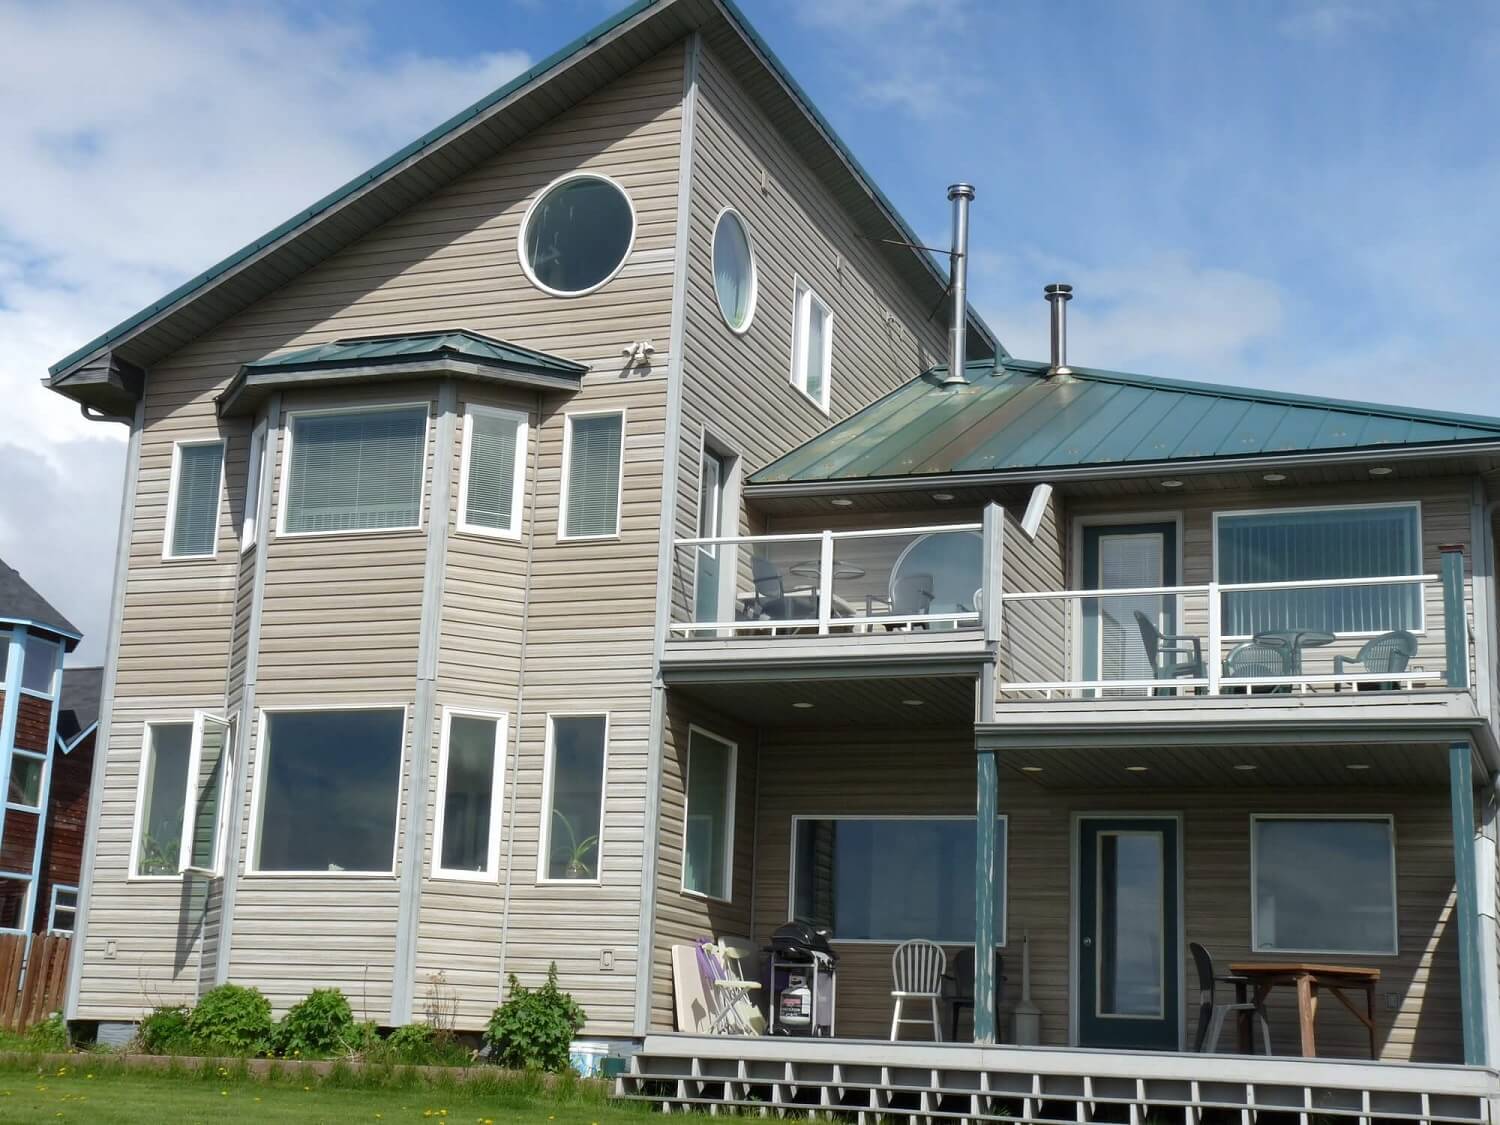 Bluffivew Lodge - from Seaside